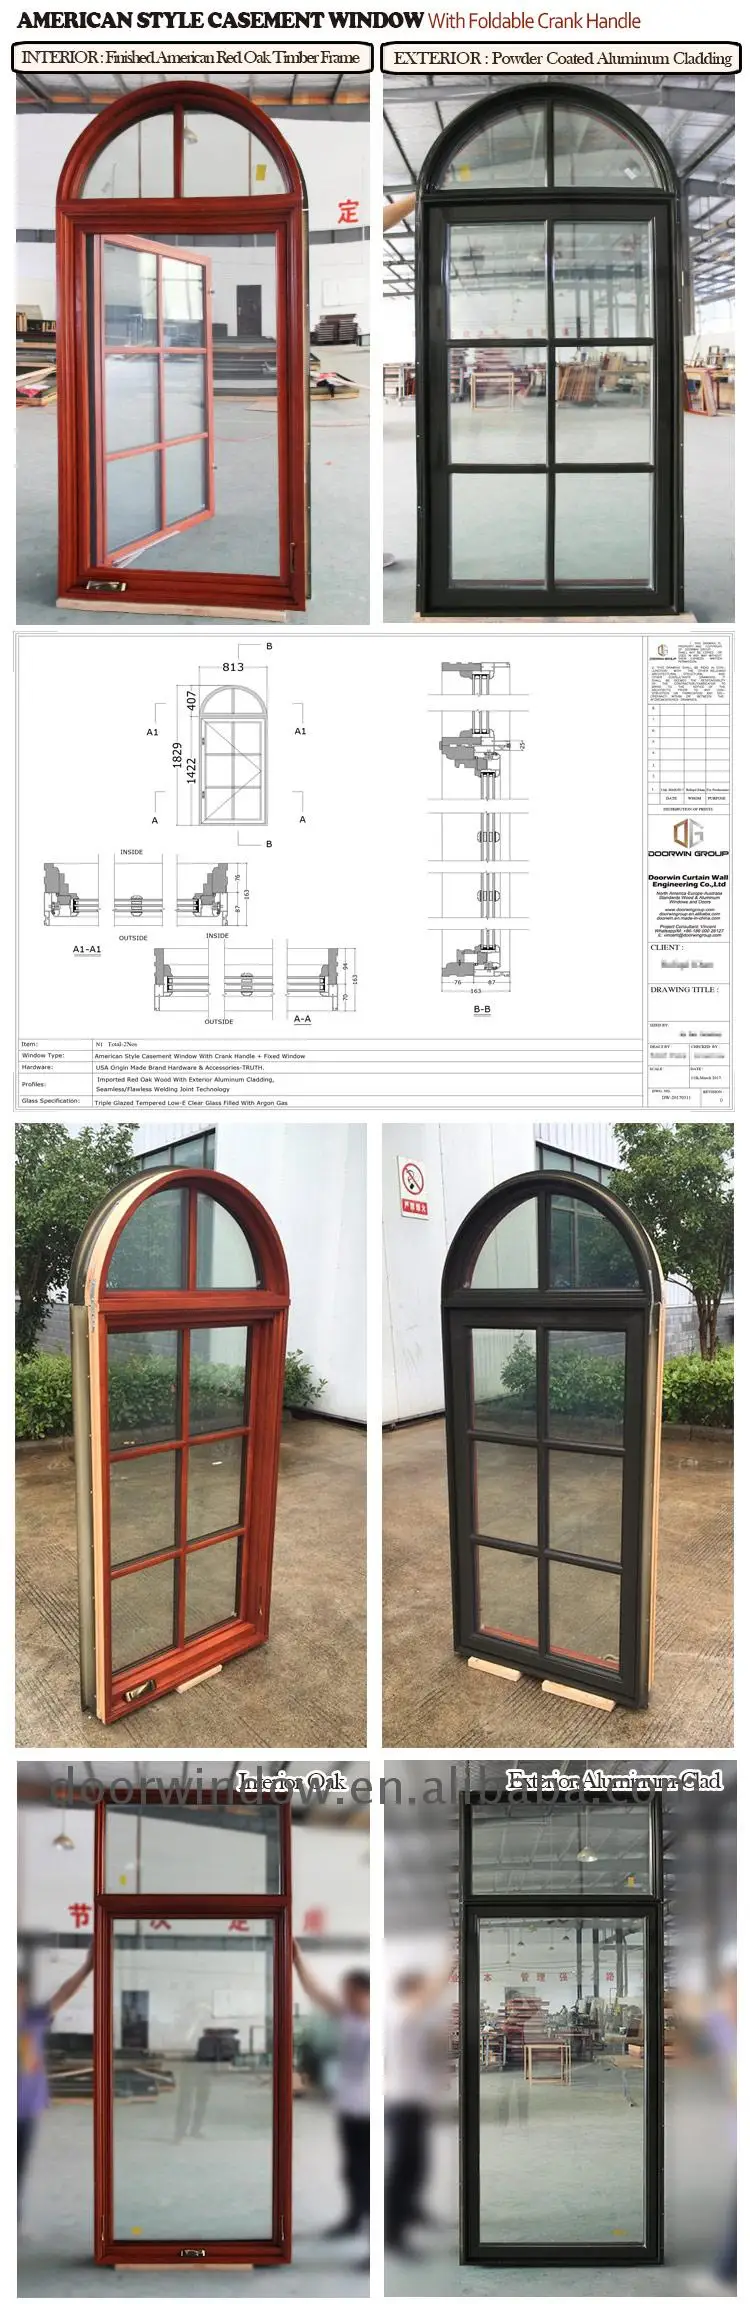 China factory supplied top quality soundproof windows solid wood round window